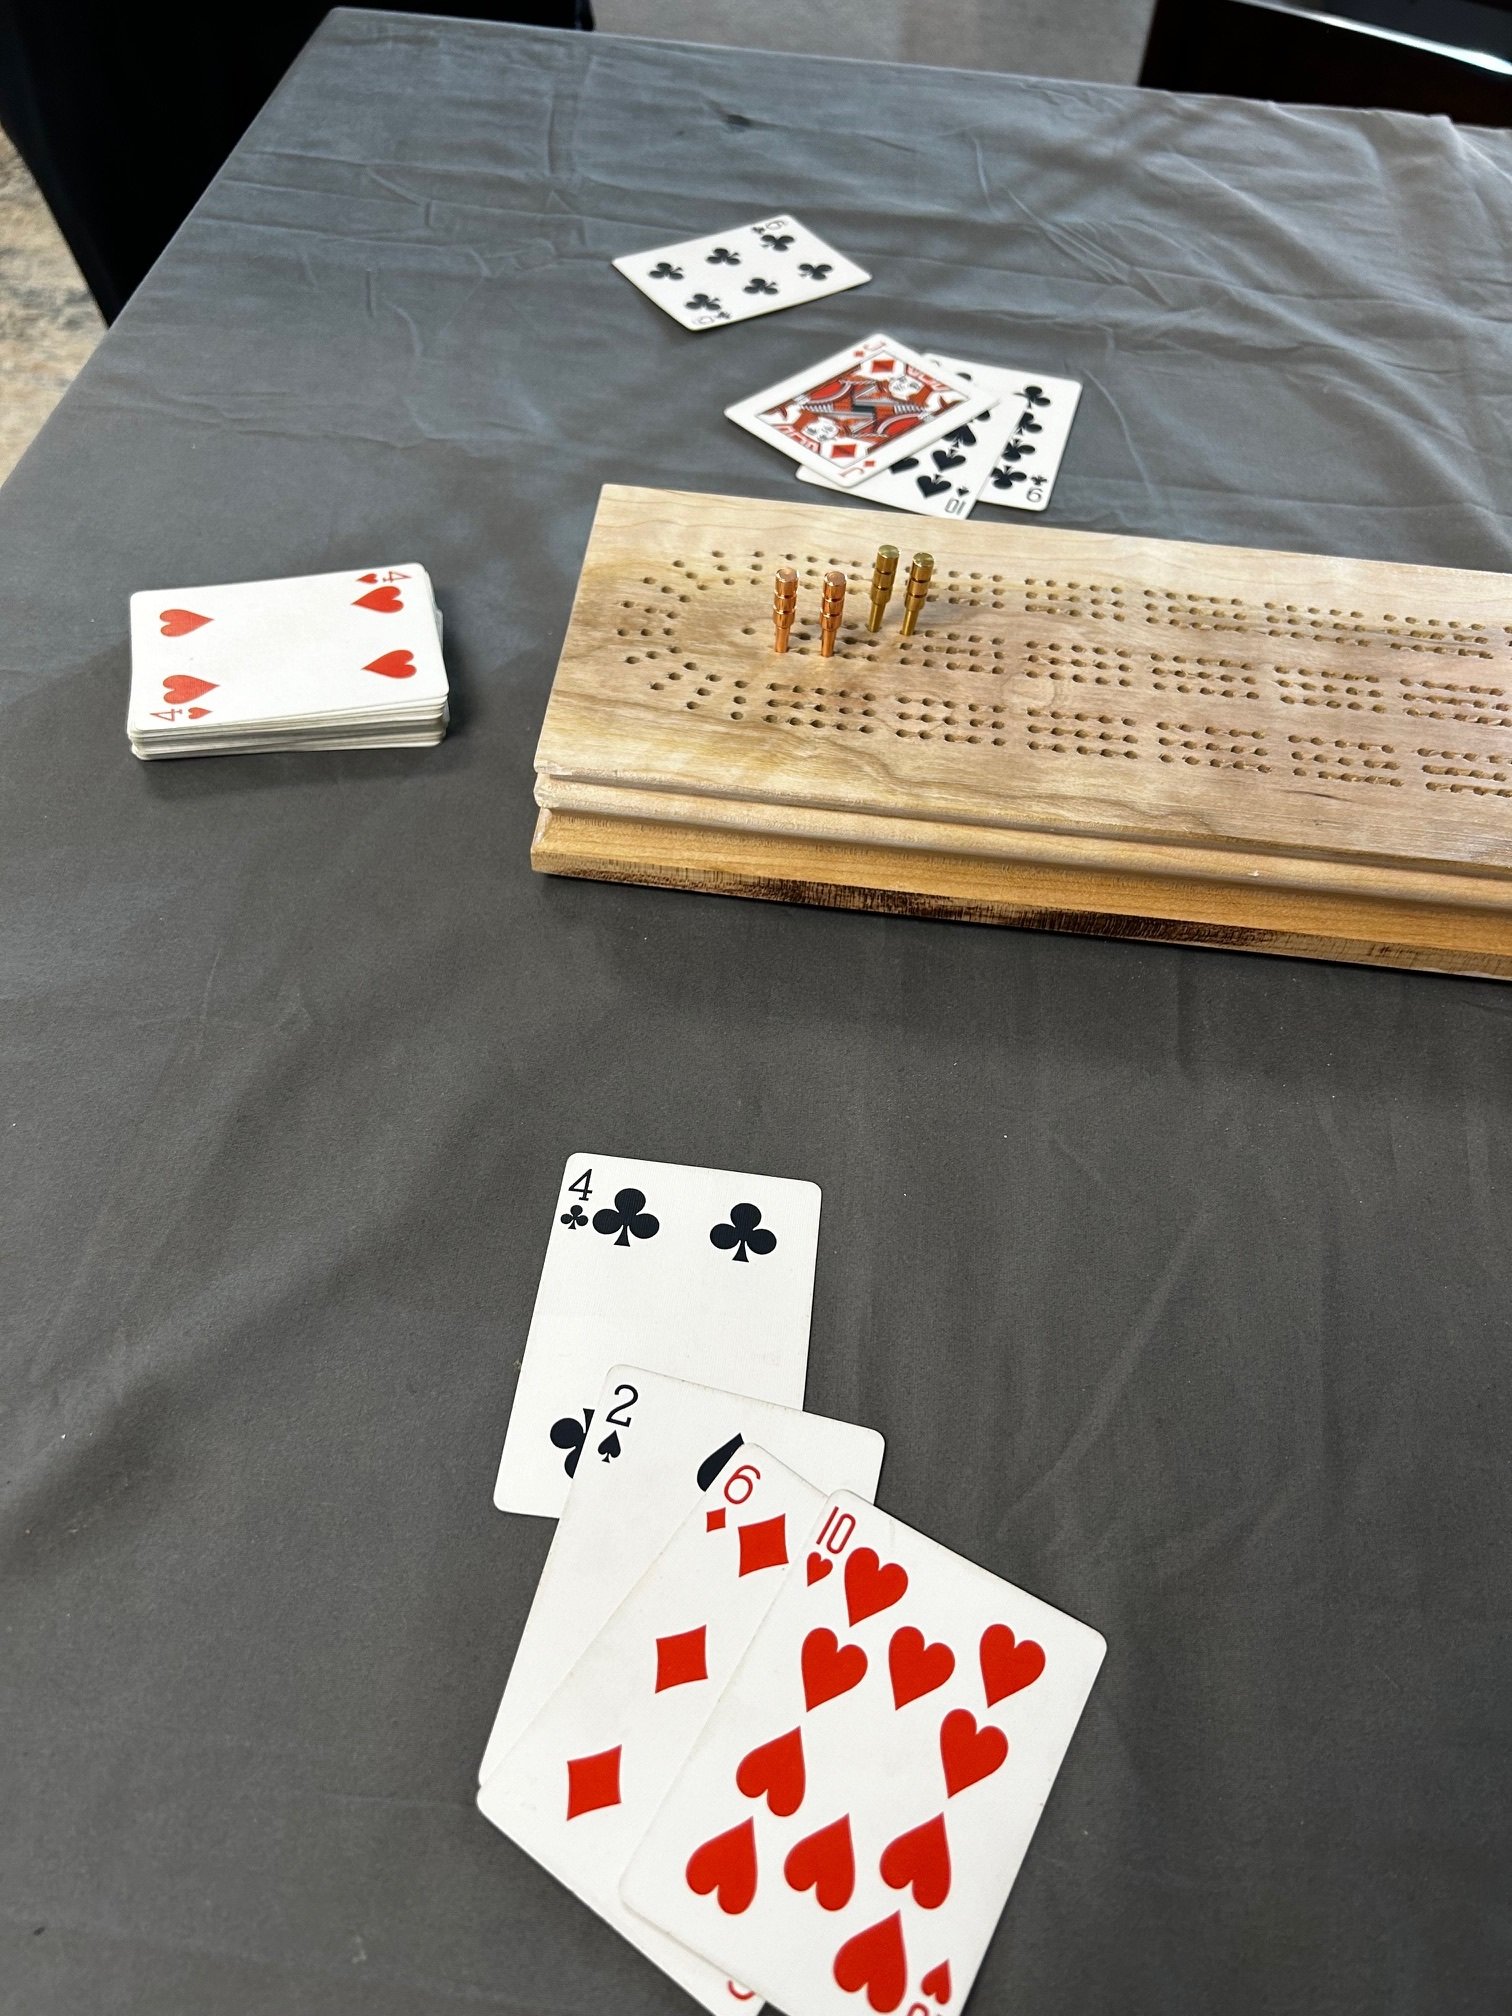 Mad Cribbage was played